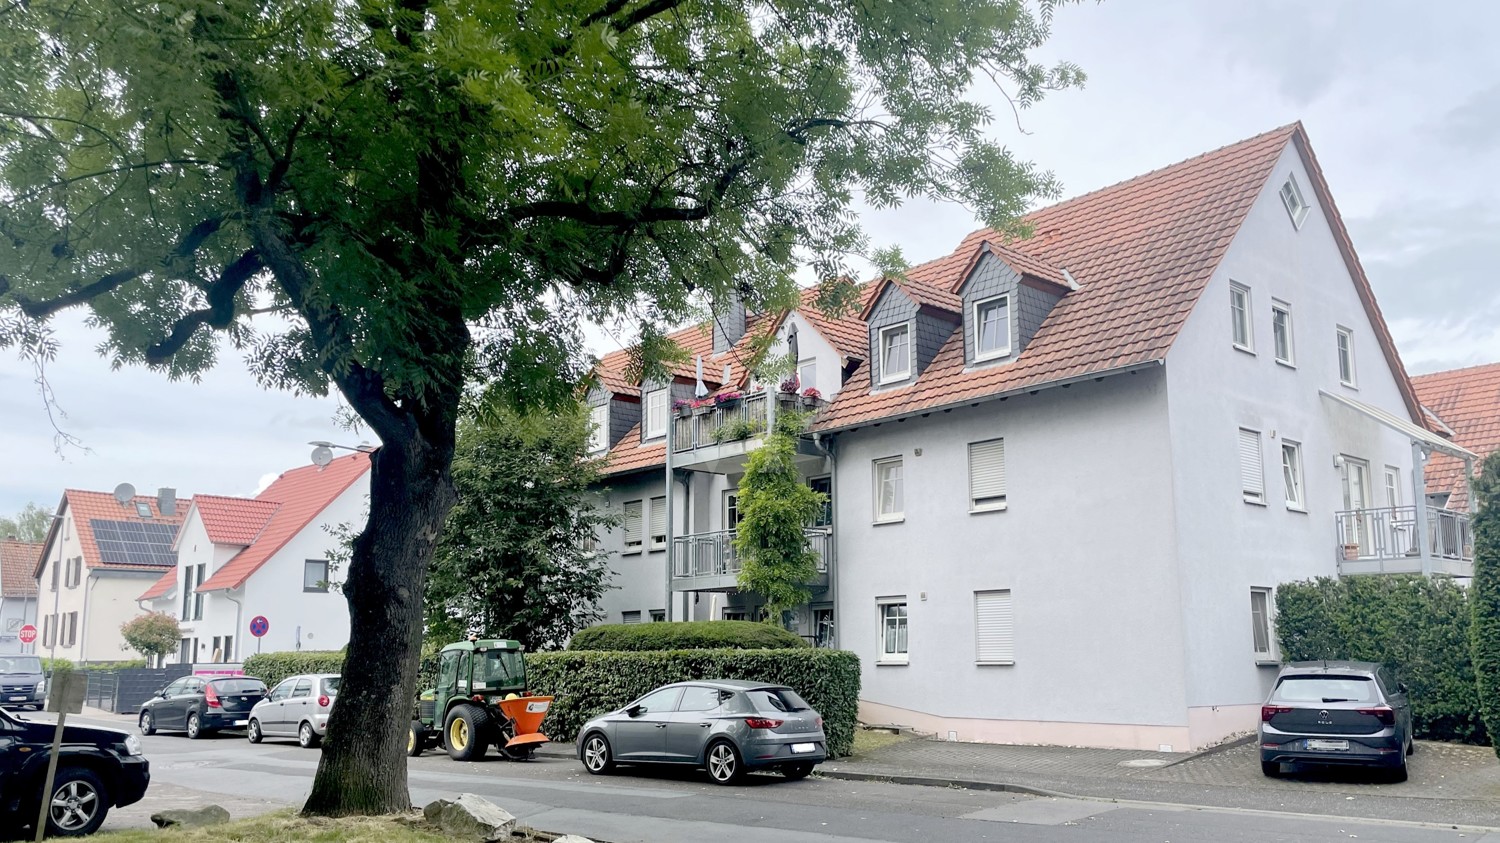 Lage des Hauses in Allee